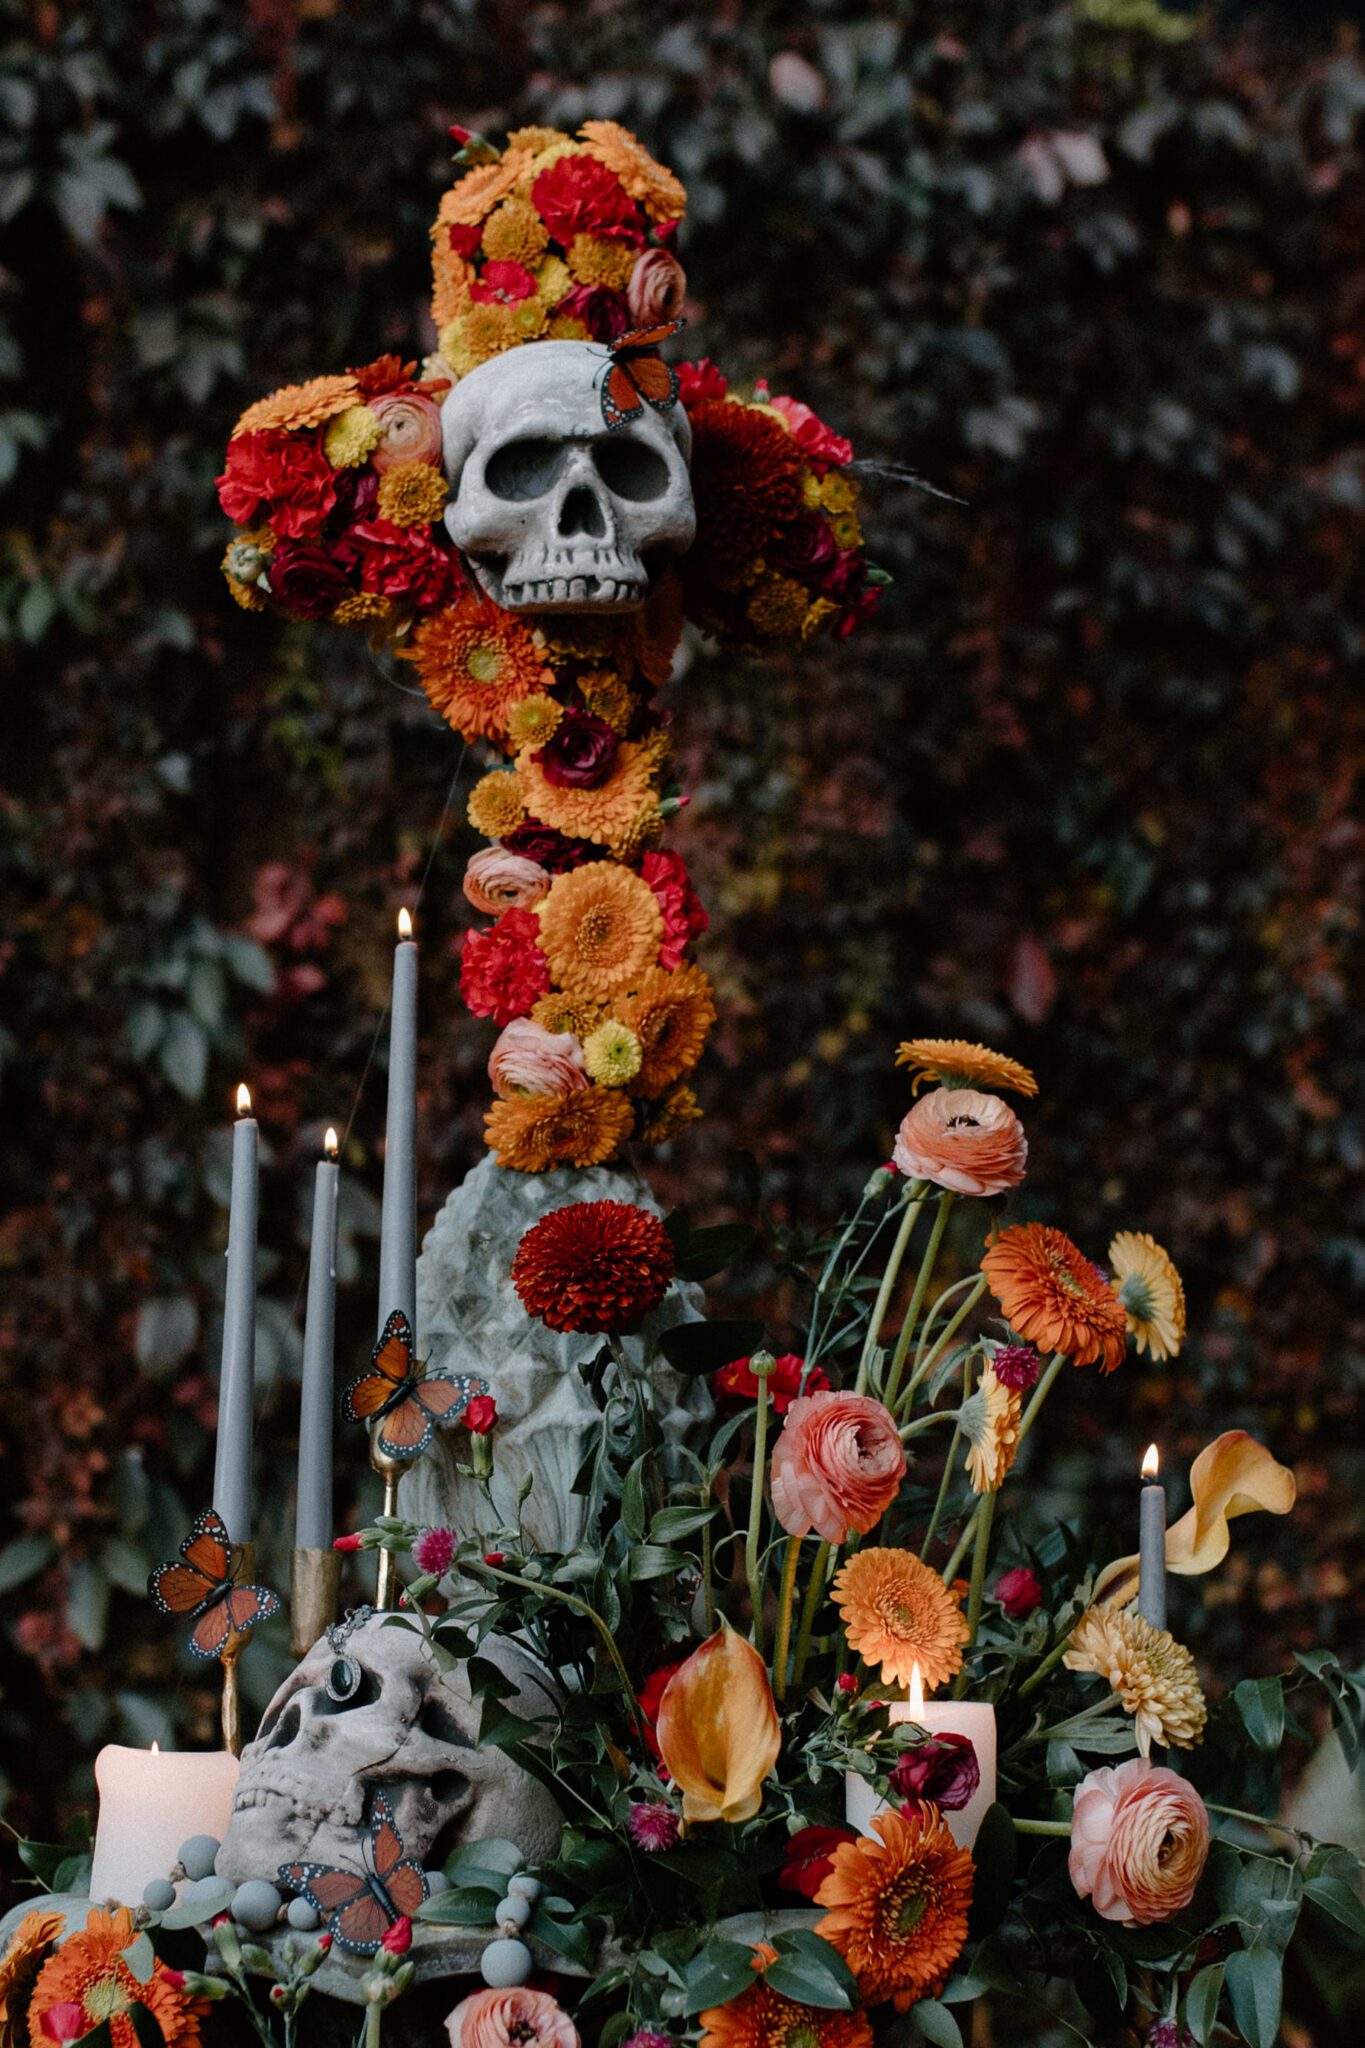 Halloween inspired decor featuring skulls, candles, and florals by Calyx Floral Design. Image captured by Red Deer Wedding Photographer, Nikki Collette.